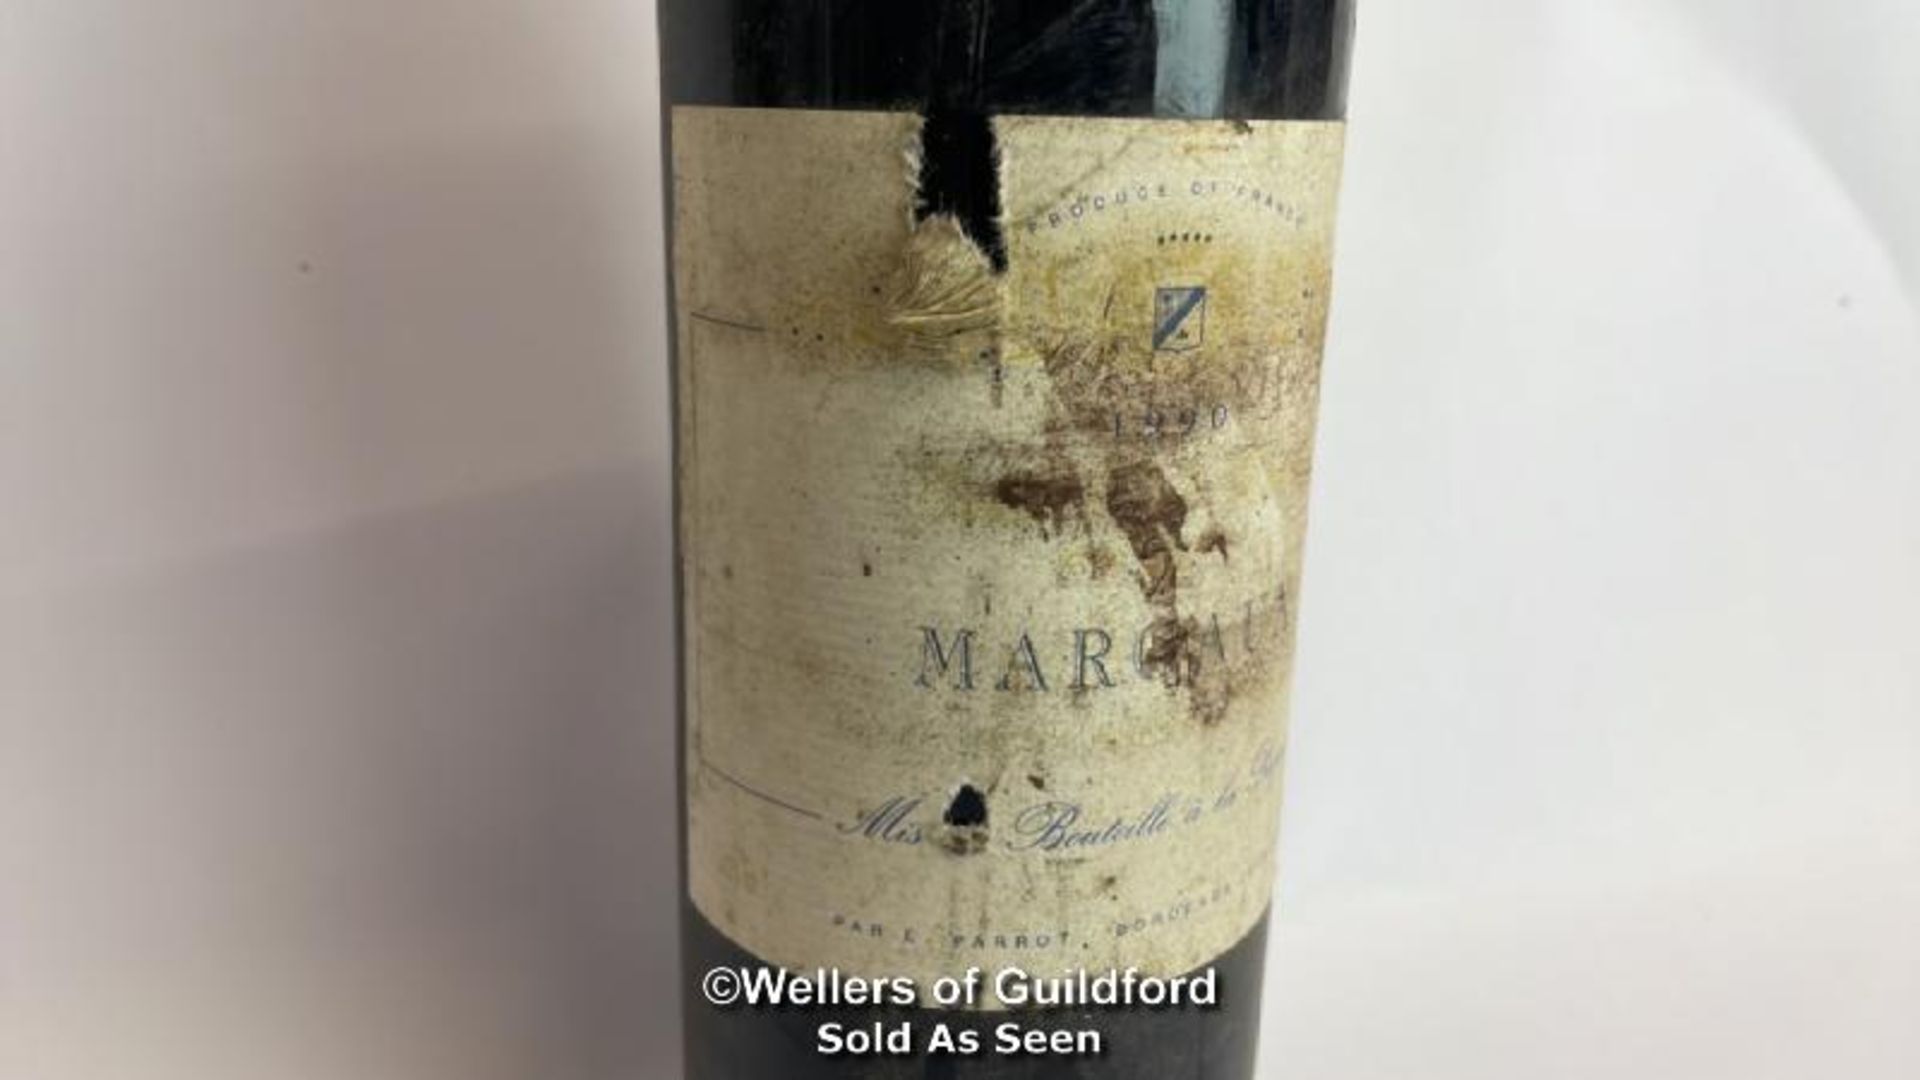 1990 Margaux Par E Parrot Bordeaux (Gironde), 75cl, 12% vol / Please see images for fill level and - Image 6 of 12